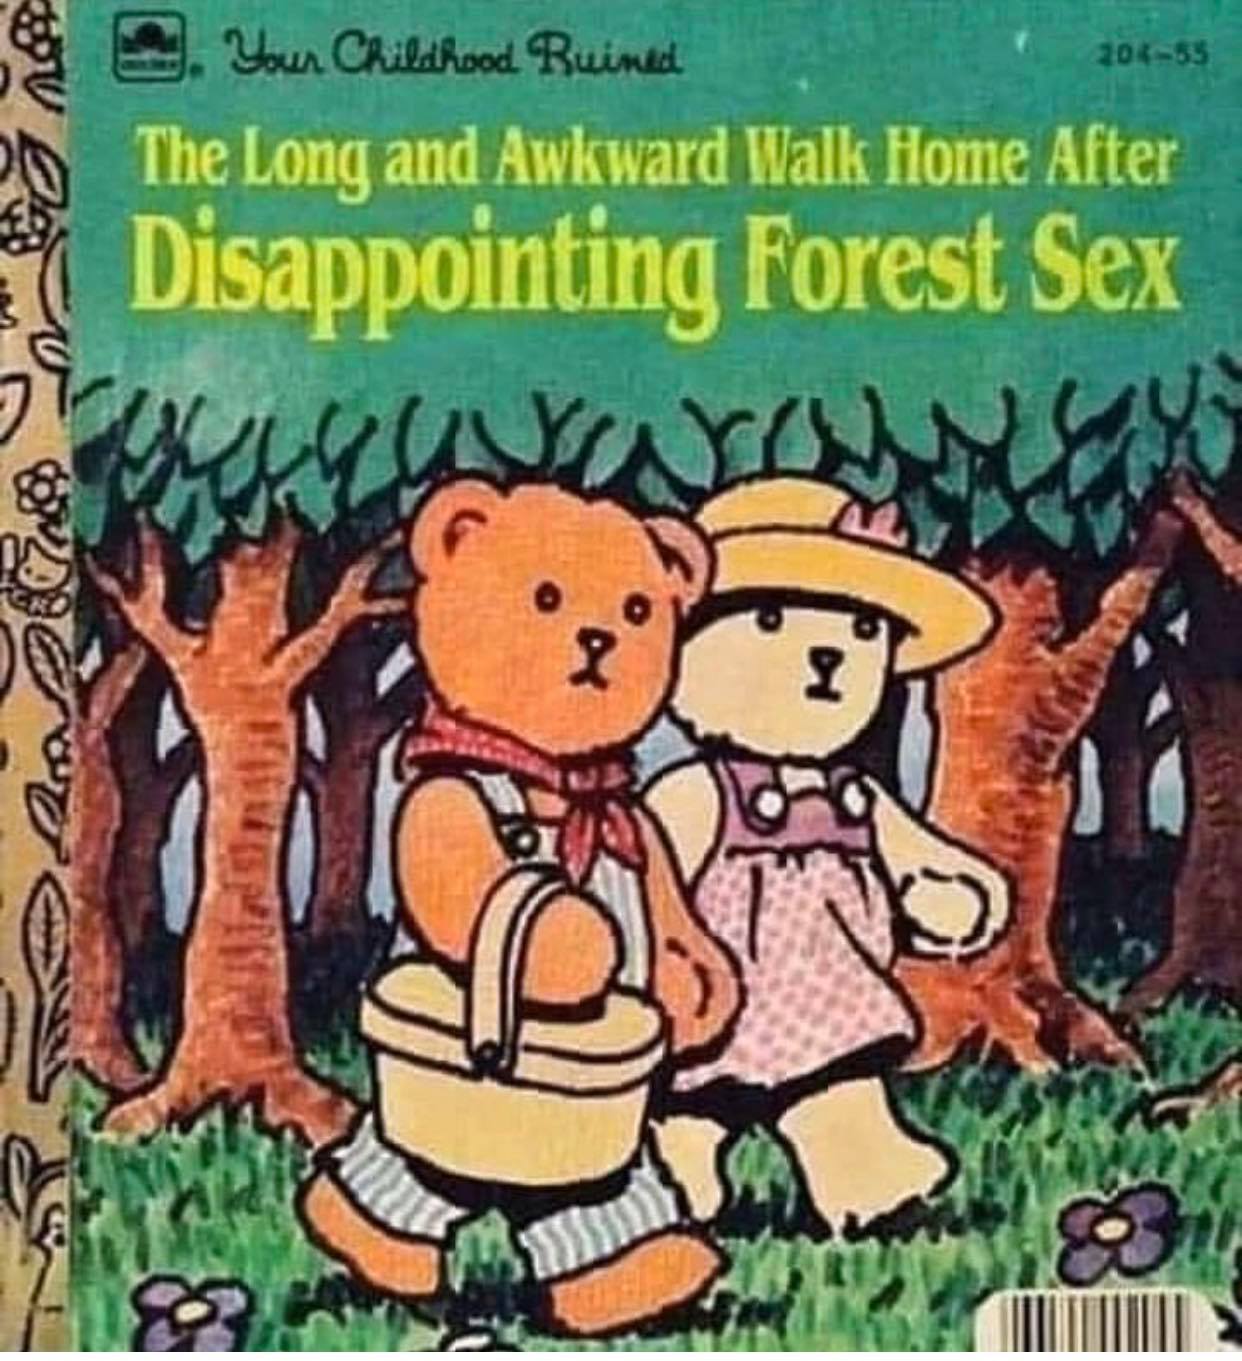 long and awkward walk home - 20455 3. Your Childhood Ruined The Long and Awkward Walk Home After Disappointing Forest Sex